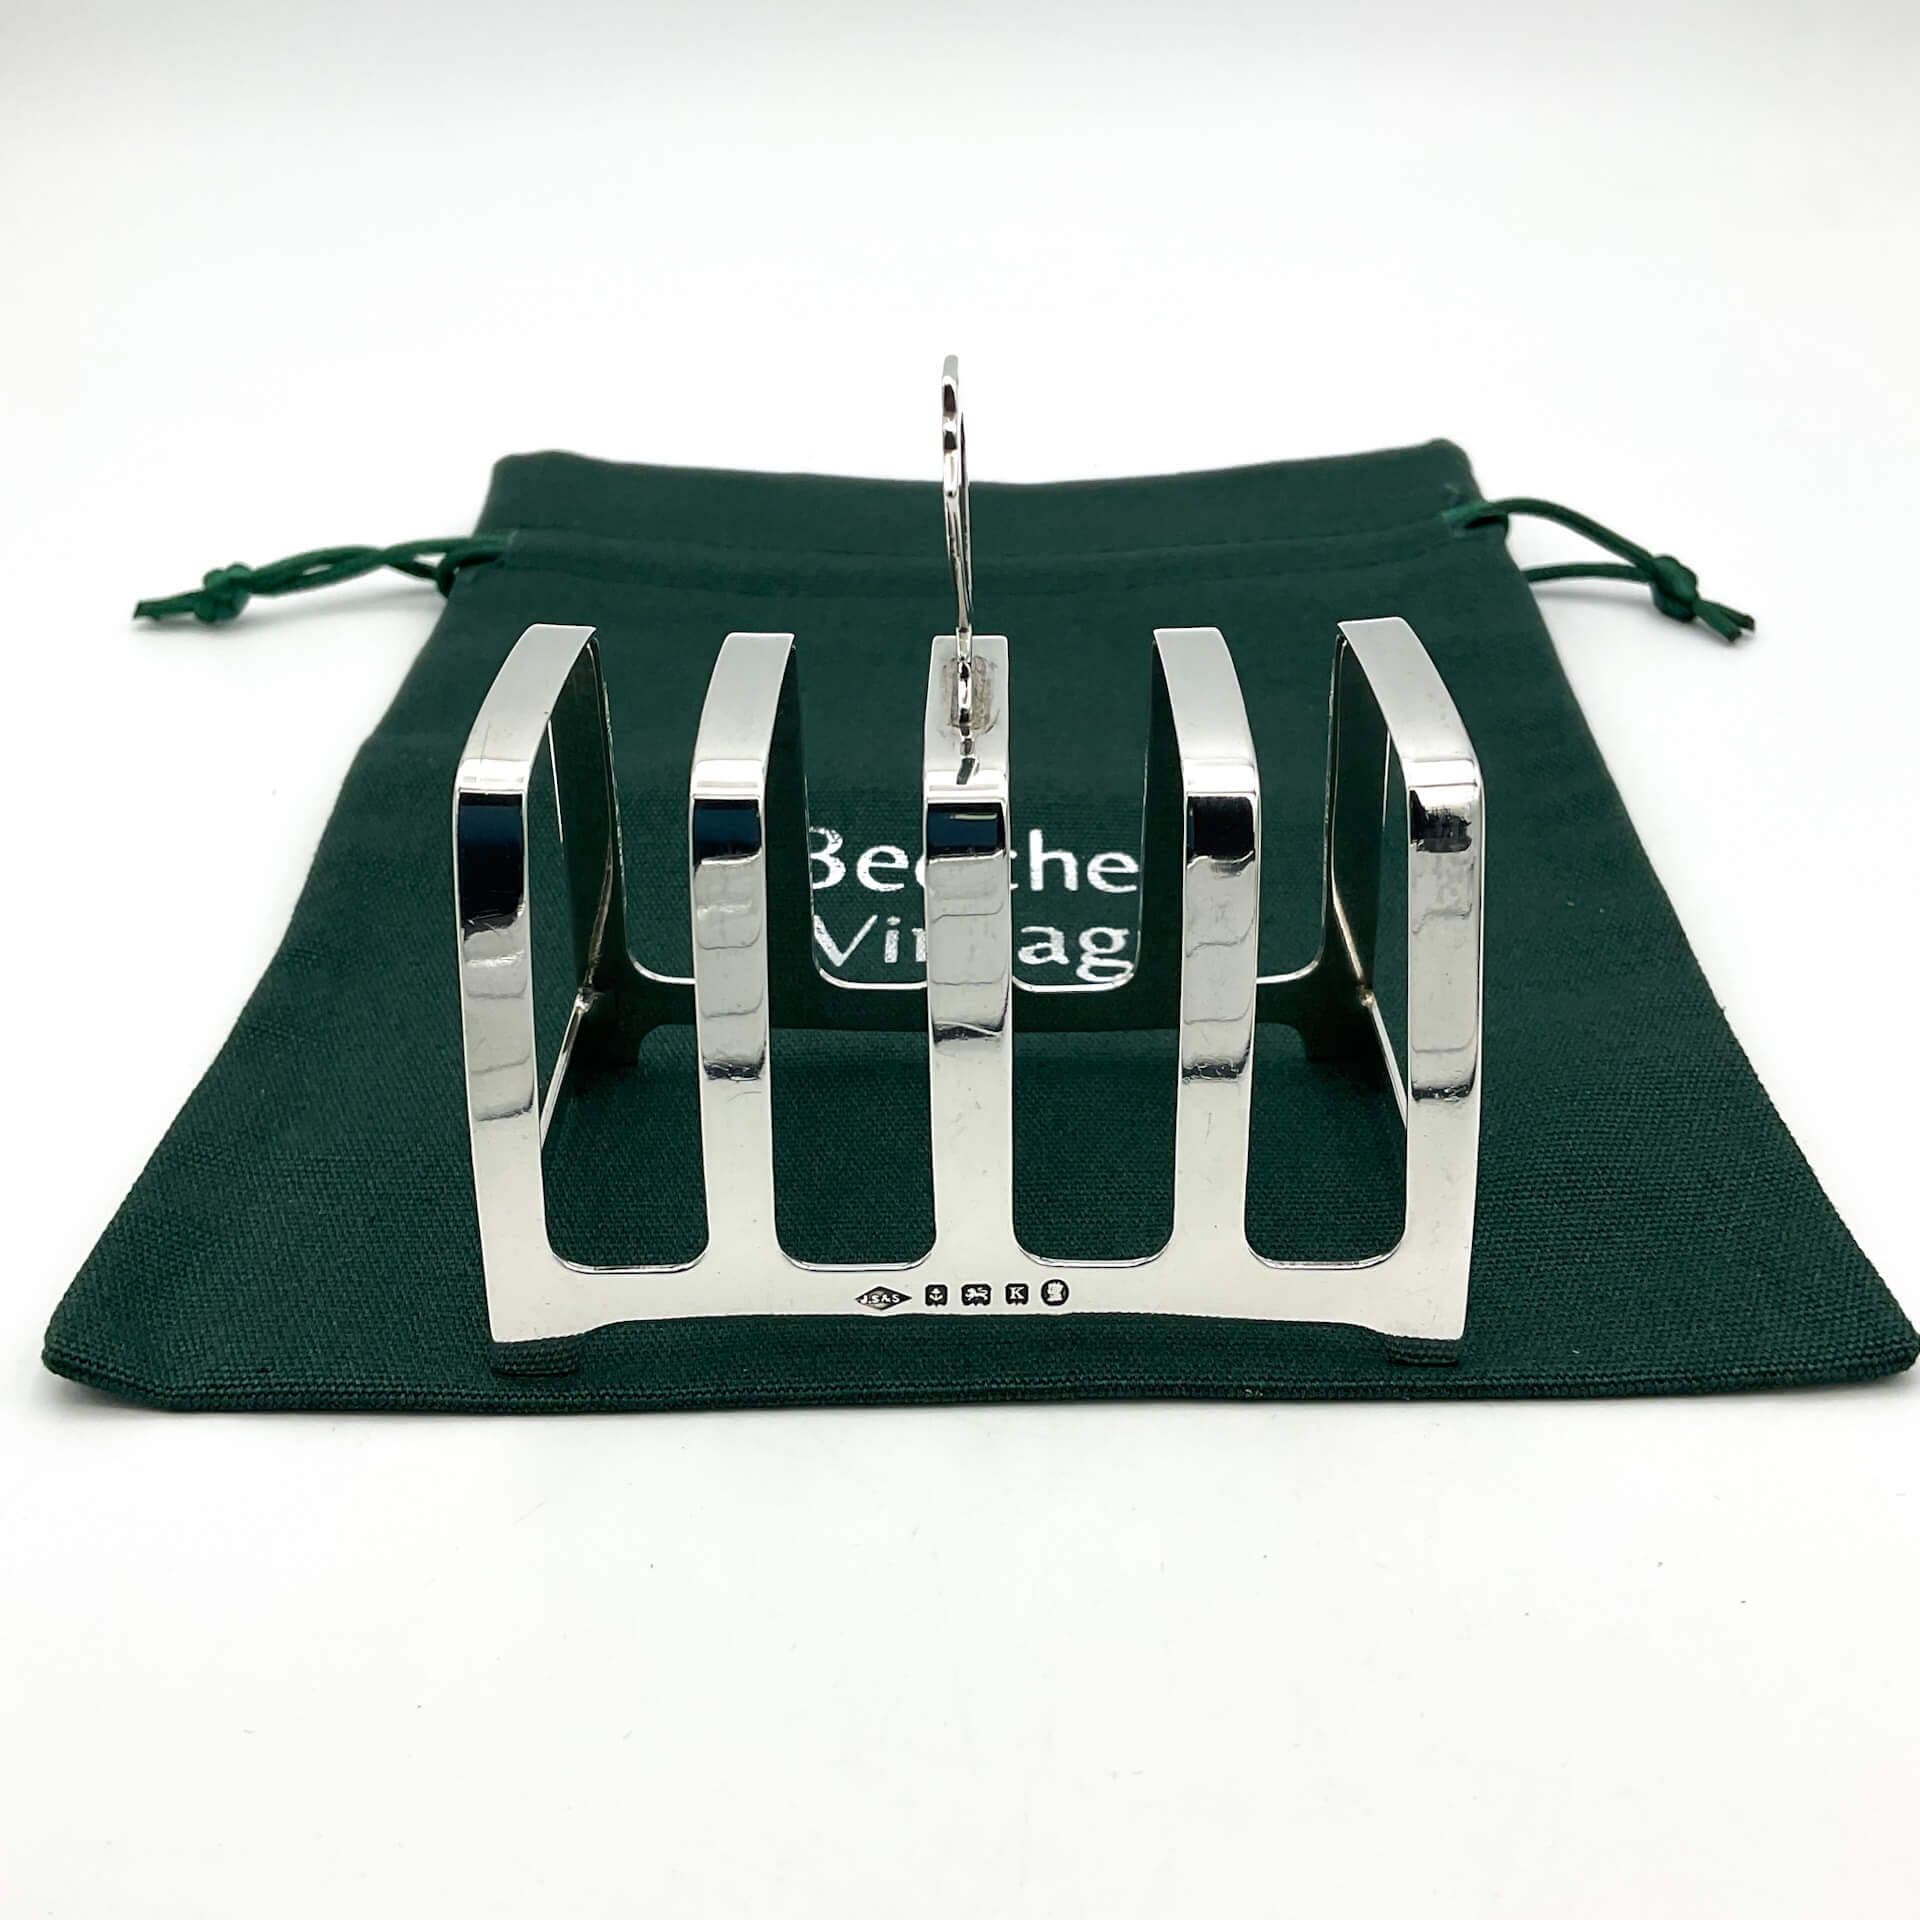 Art Deco Silver toast rack showing spaces for four slices of toast and a handle in the middle. The shiny toast rack is sitting on a green cotton bag.